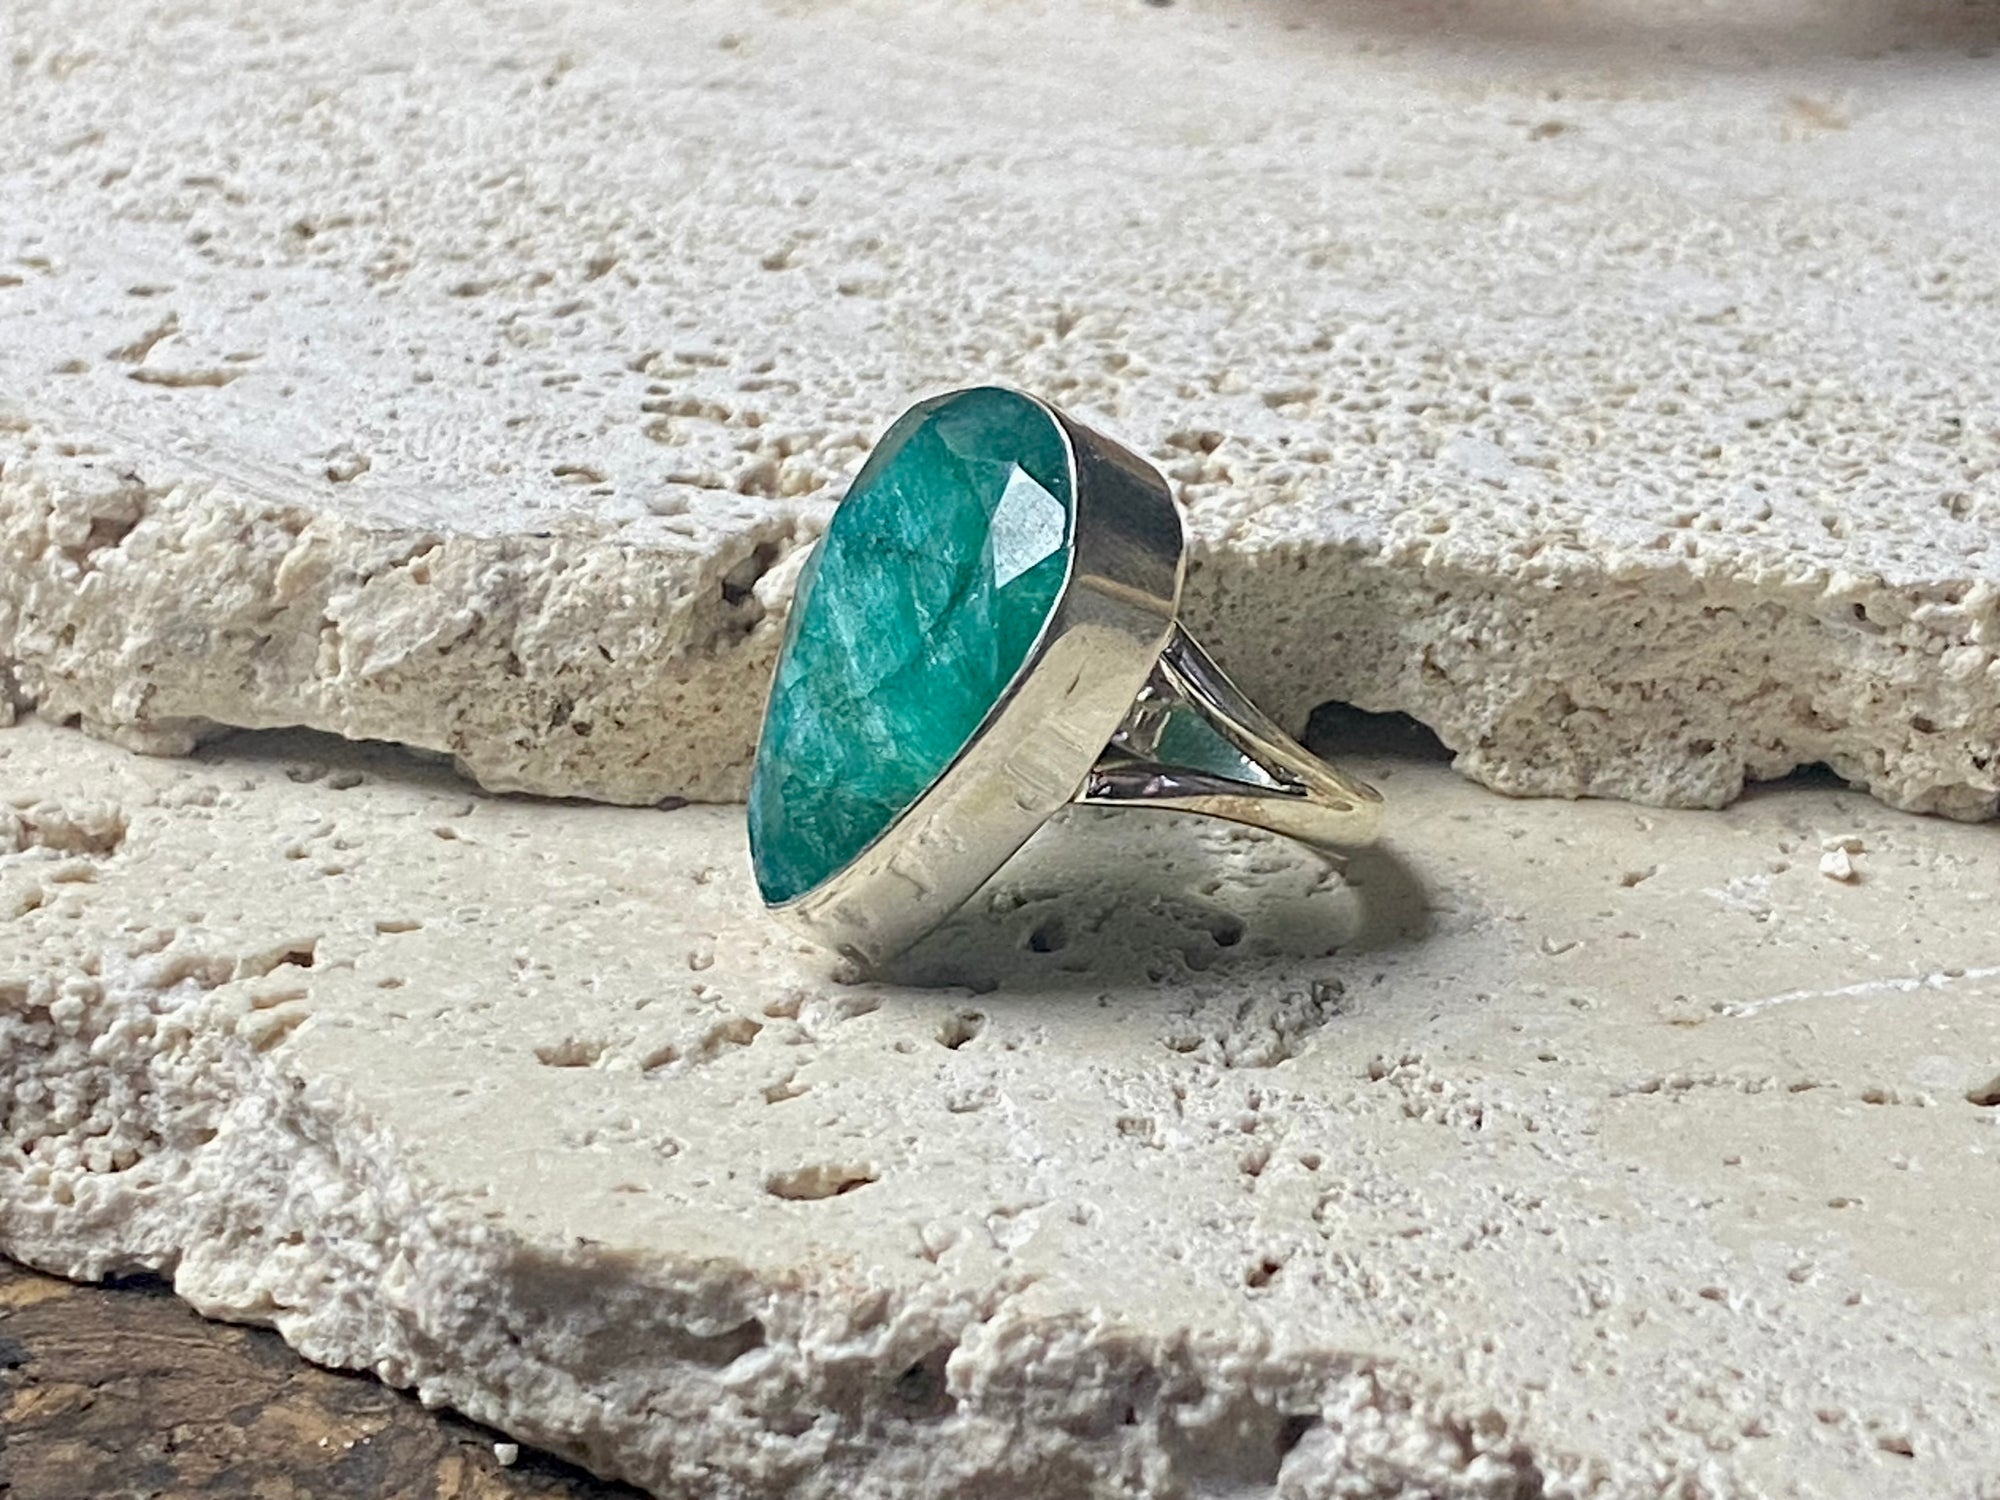 Our large facet cut emerald is set in a simple sterling silver bezel to show off the beauty and size of the stone, which is frankly huge. And it's a beautifully even, deep coloured stone as well. This is a statement ring that can be worn be either men or women.  Measurements:  Emerald 2.5 x 1.7 cm Size 8.5 | 18.75 mm